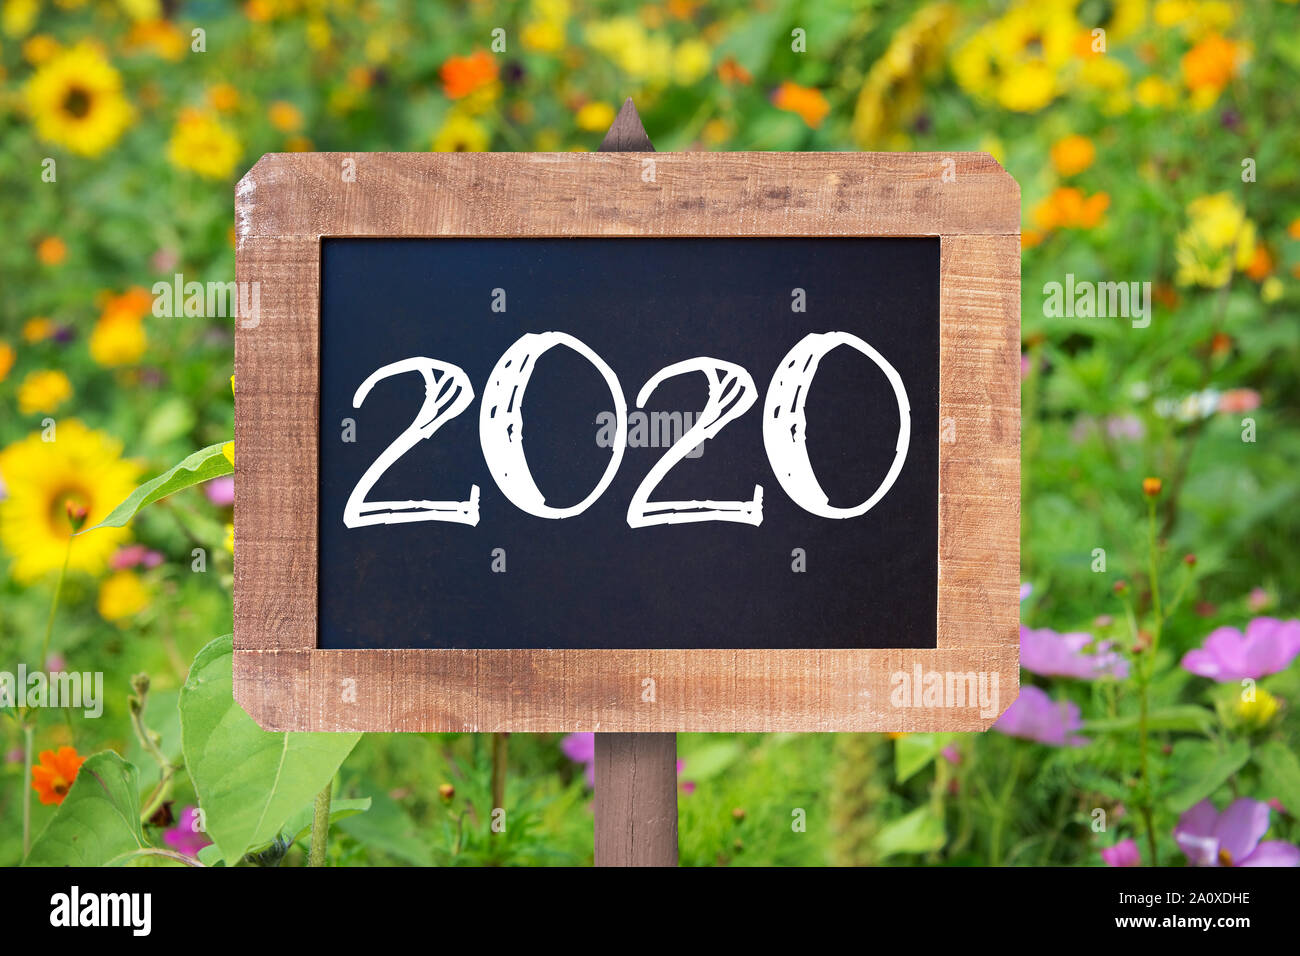 2020 written on a rustic wooden board, summer sunflowers and wild flowers in the background Stock Photo